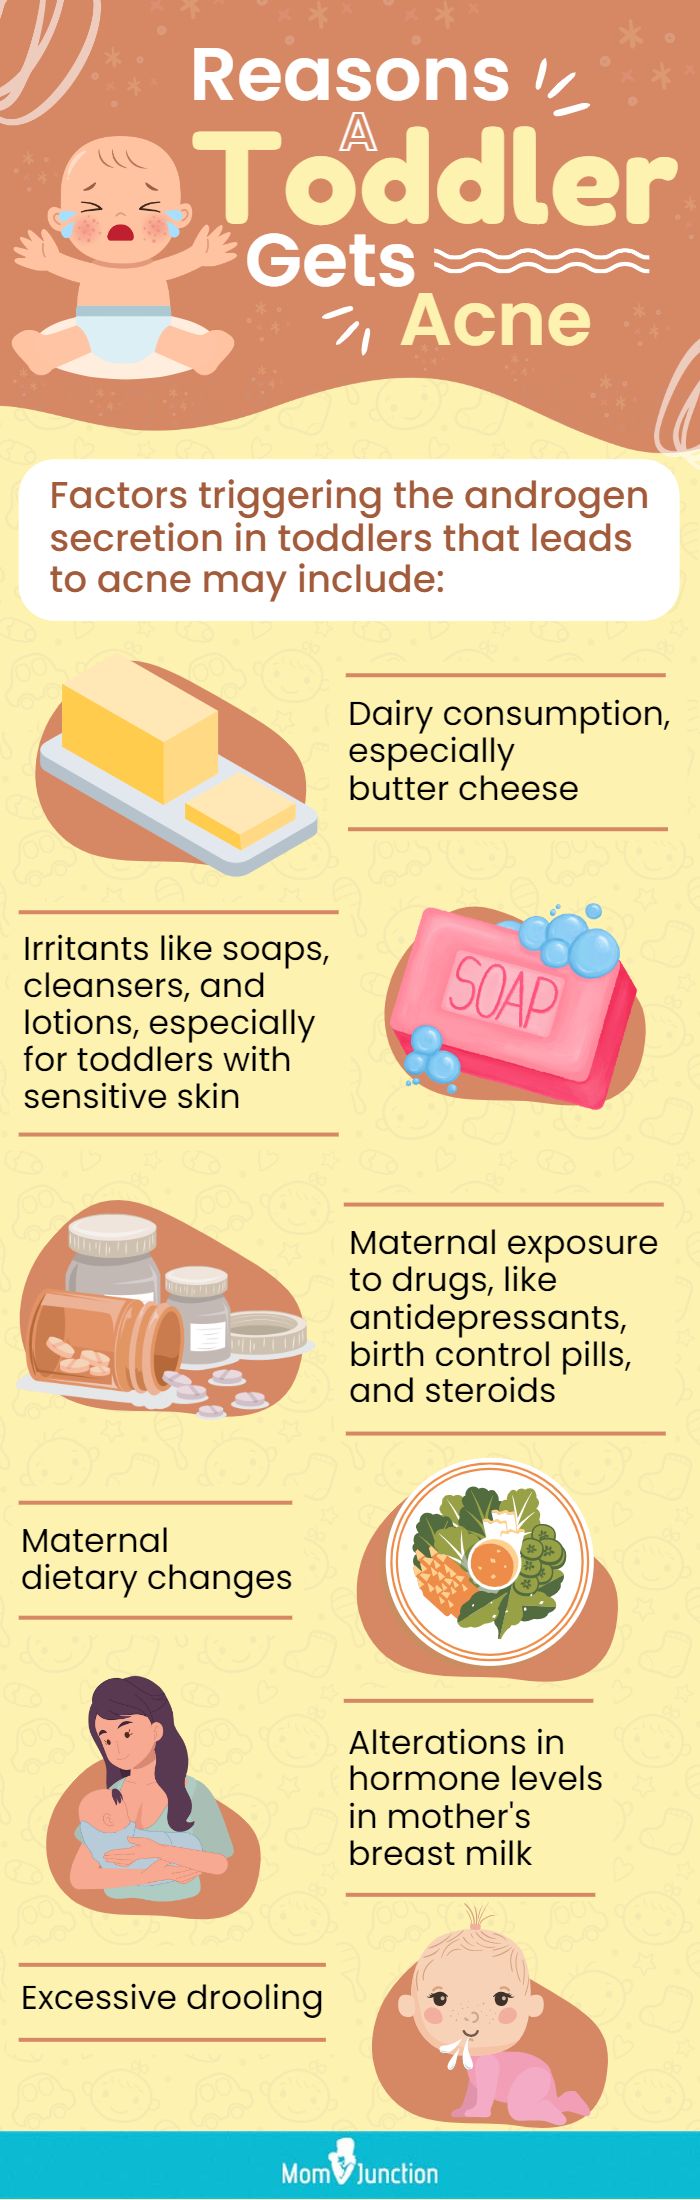 reasons a toddler gets acne (infographic)